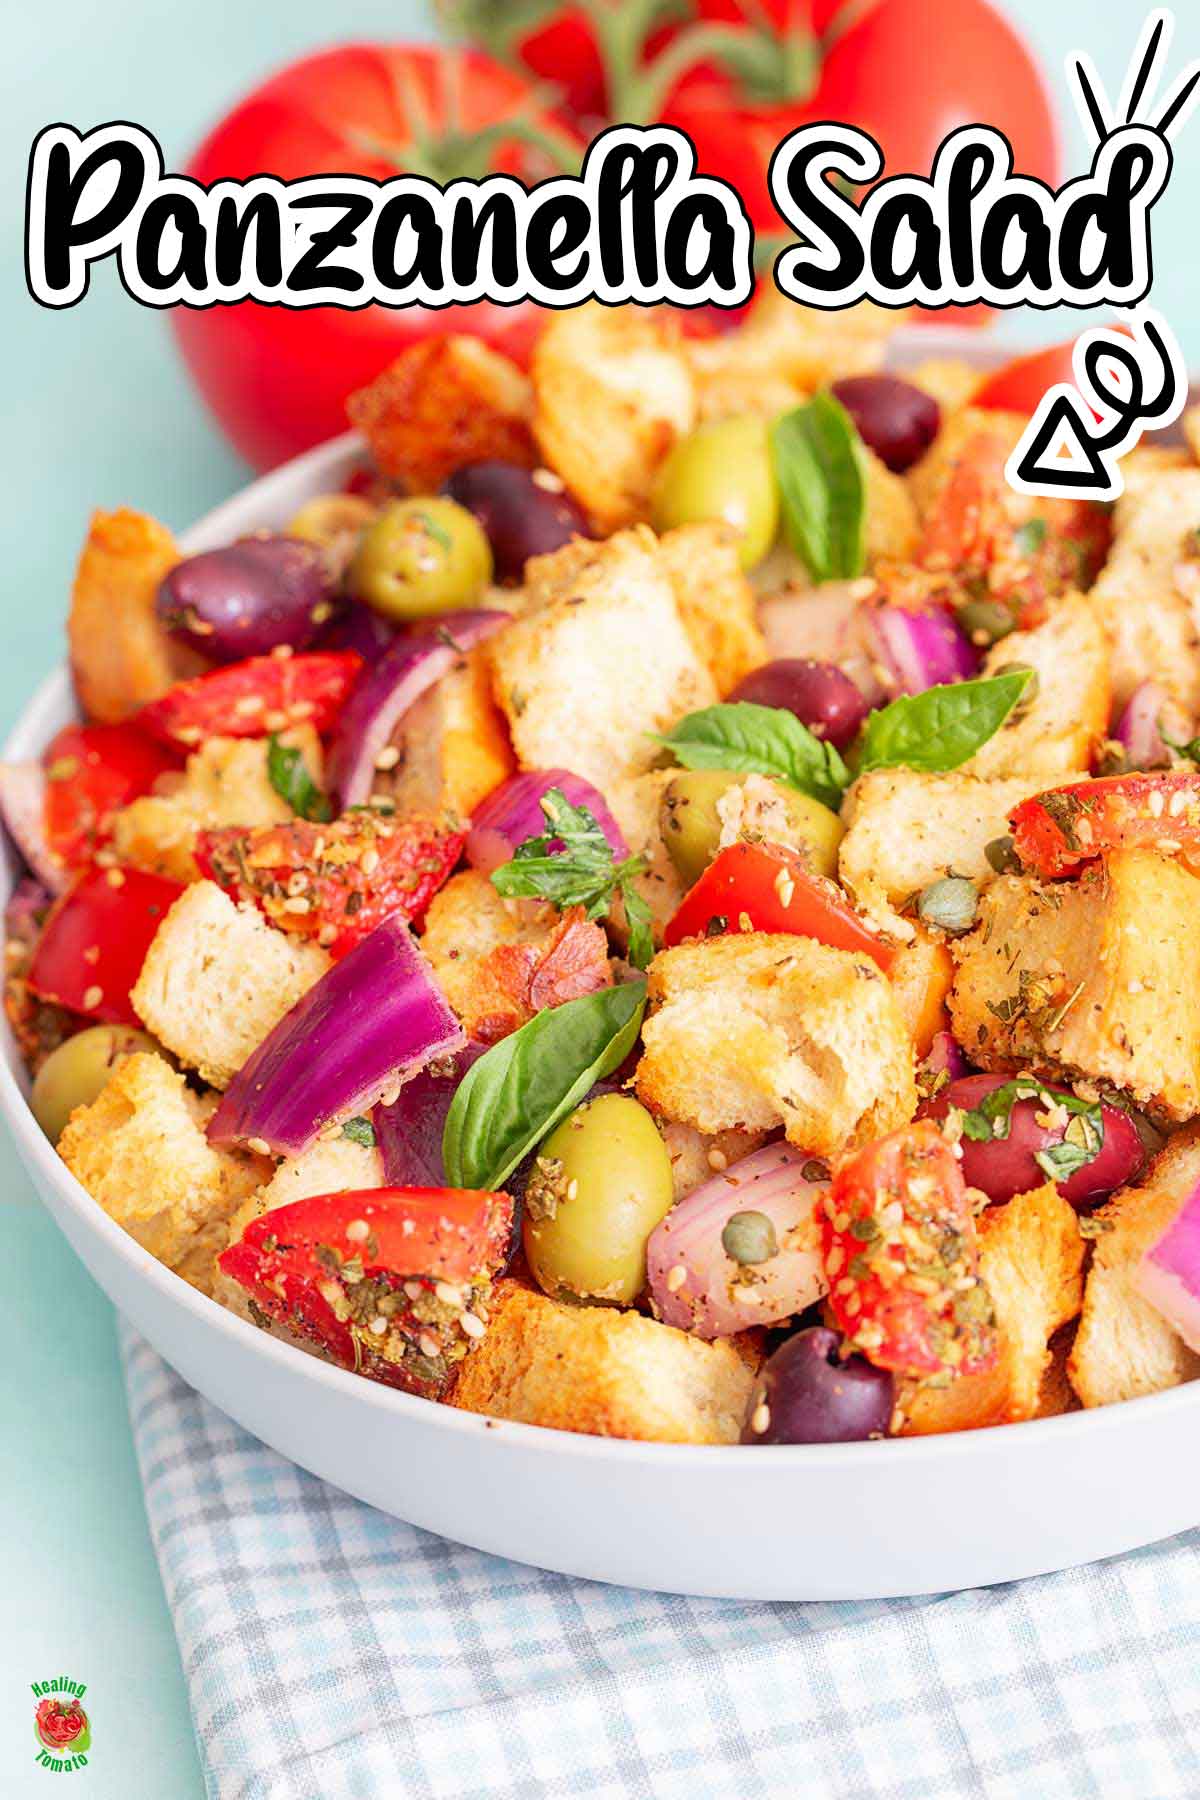 Front viewo of bread salad with olives, tomatoes, bread, onions and capers.